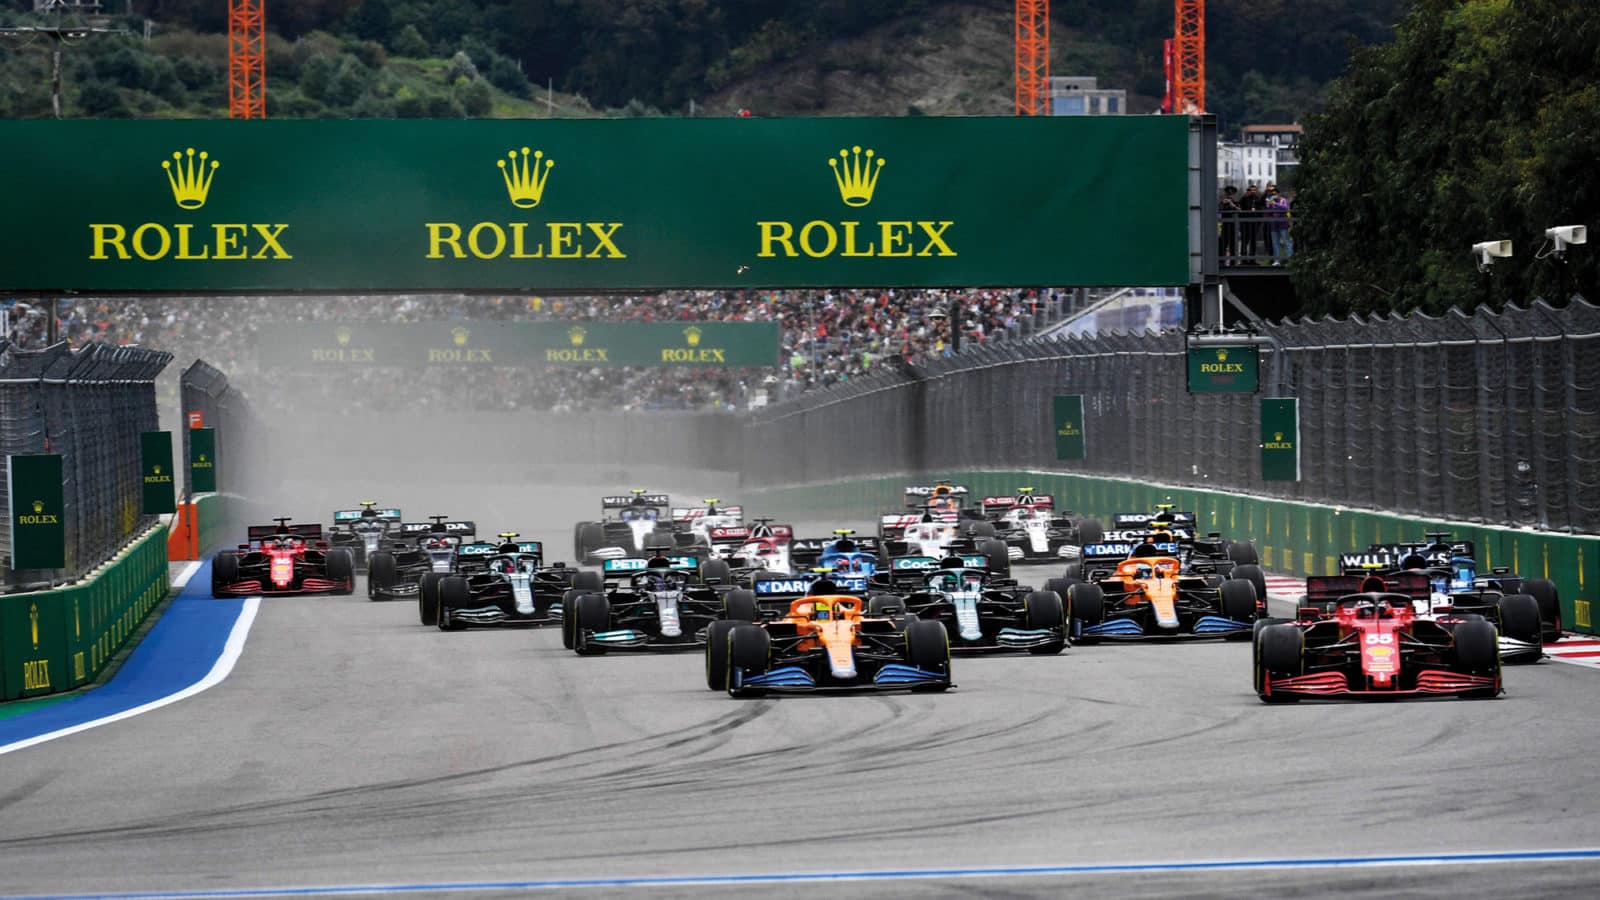 Carlos Sainz leads at the start of the 2021 Russian Grand Prix